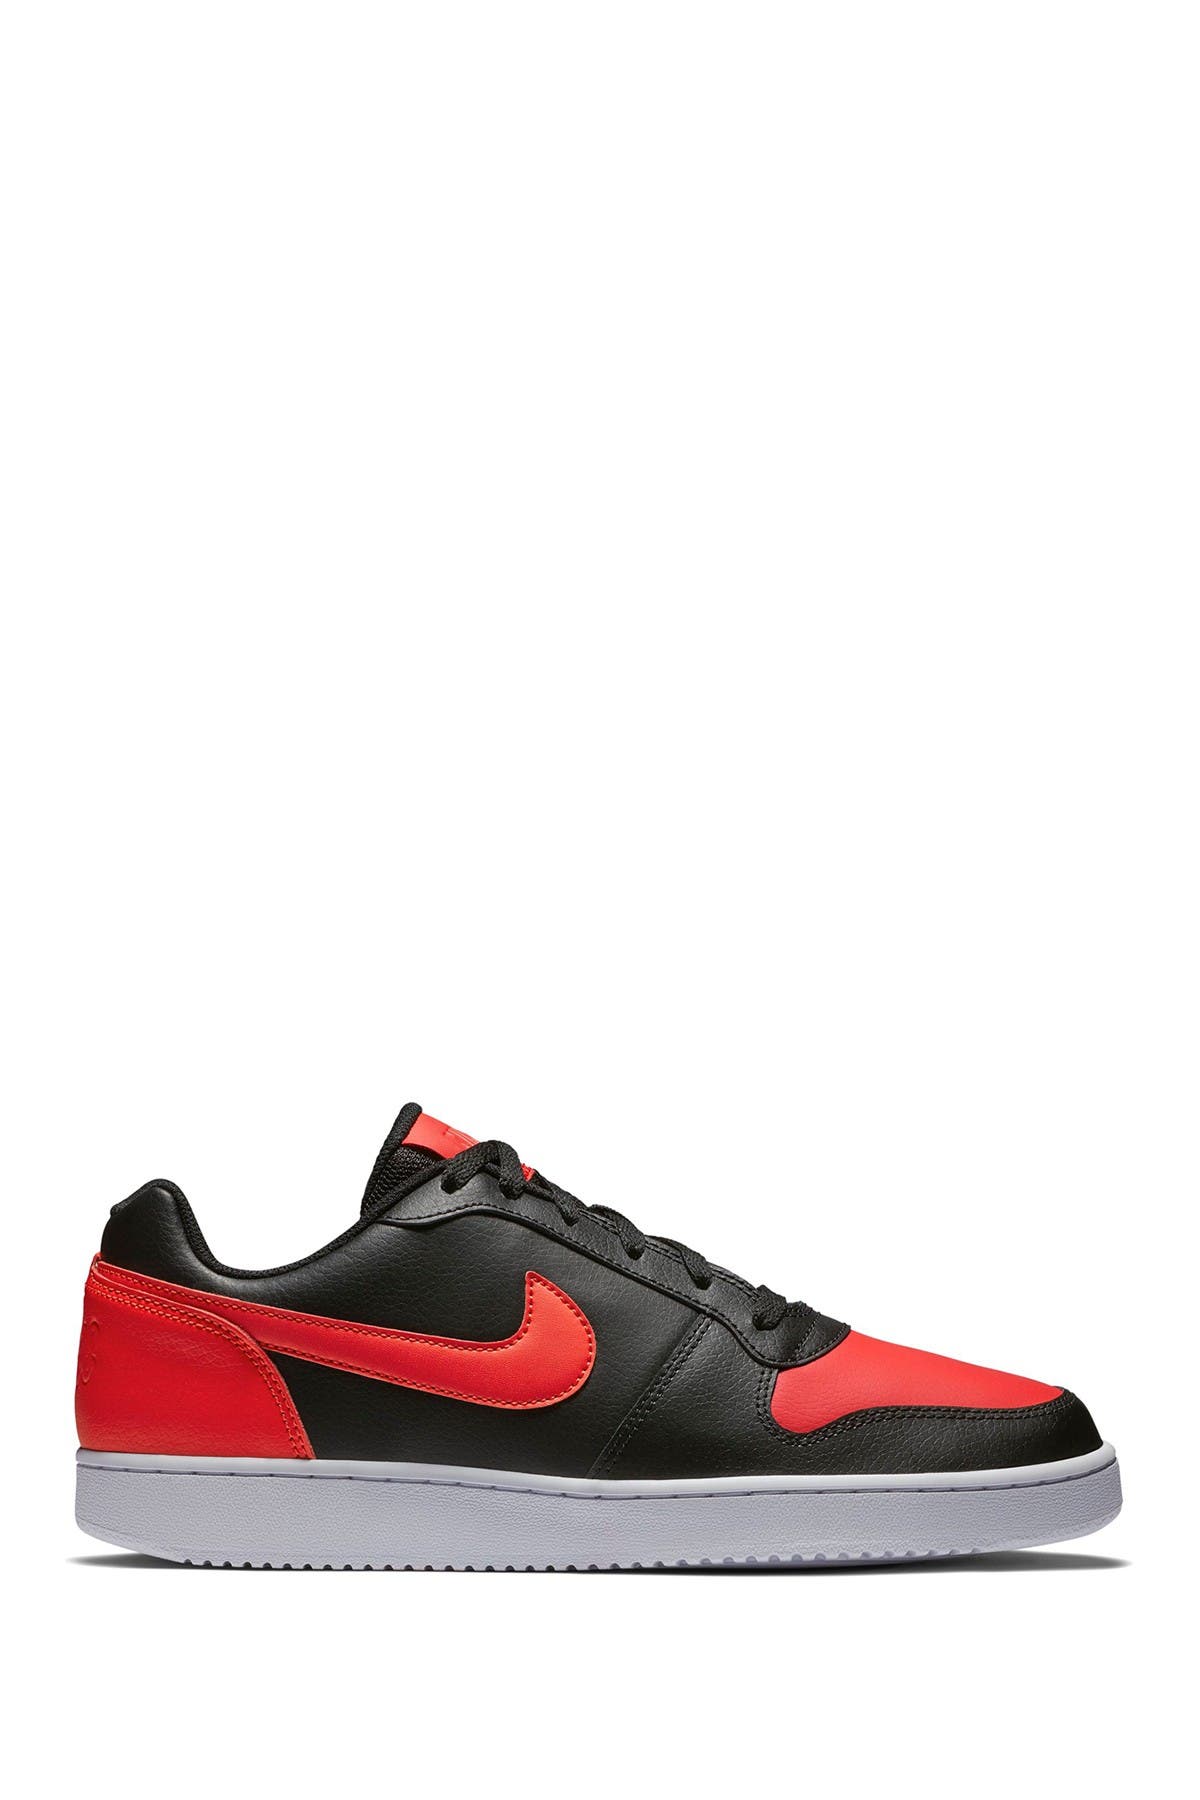 nike ebernon low black and red